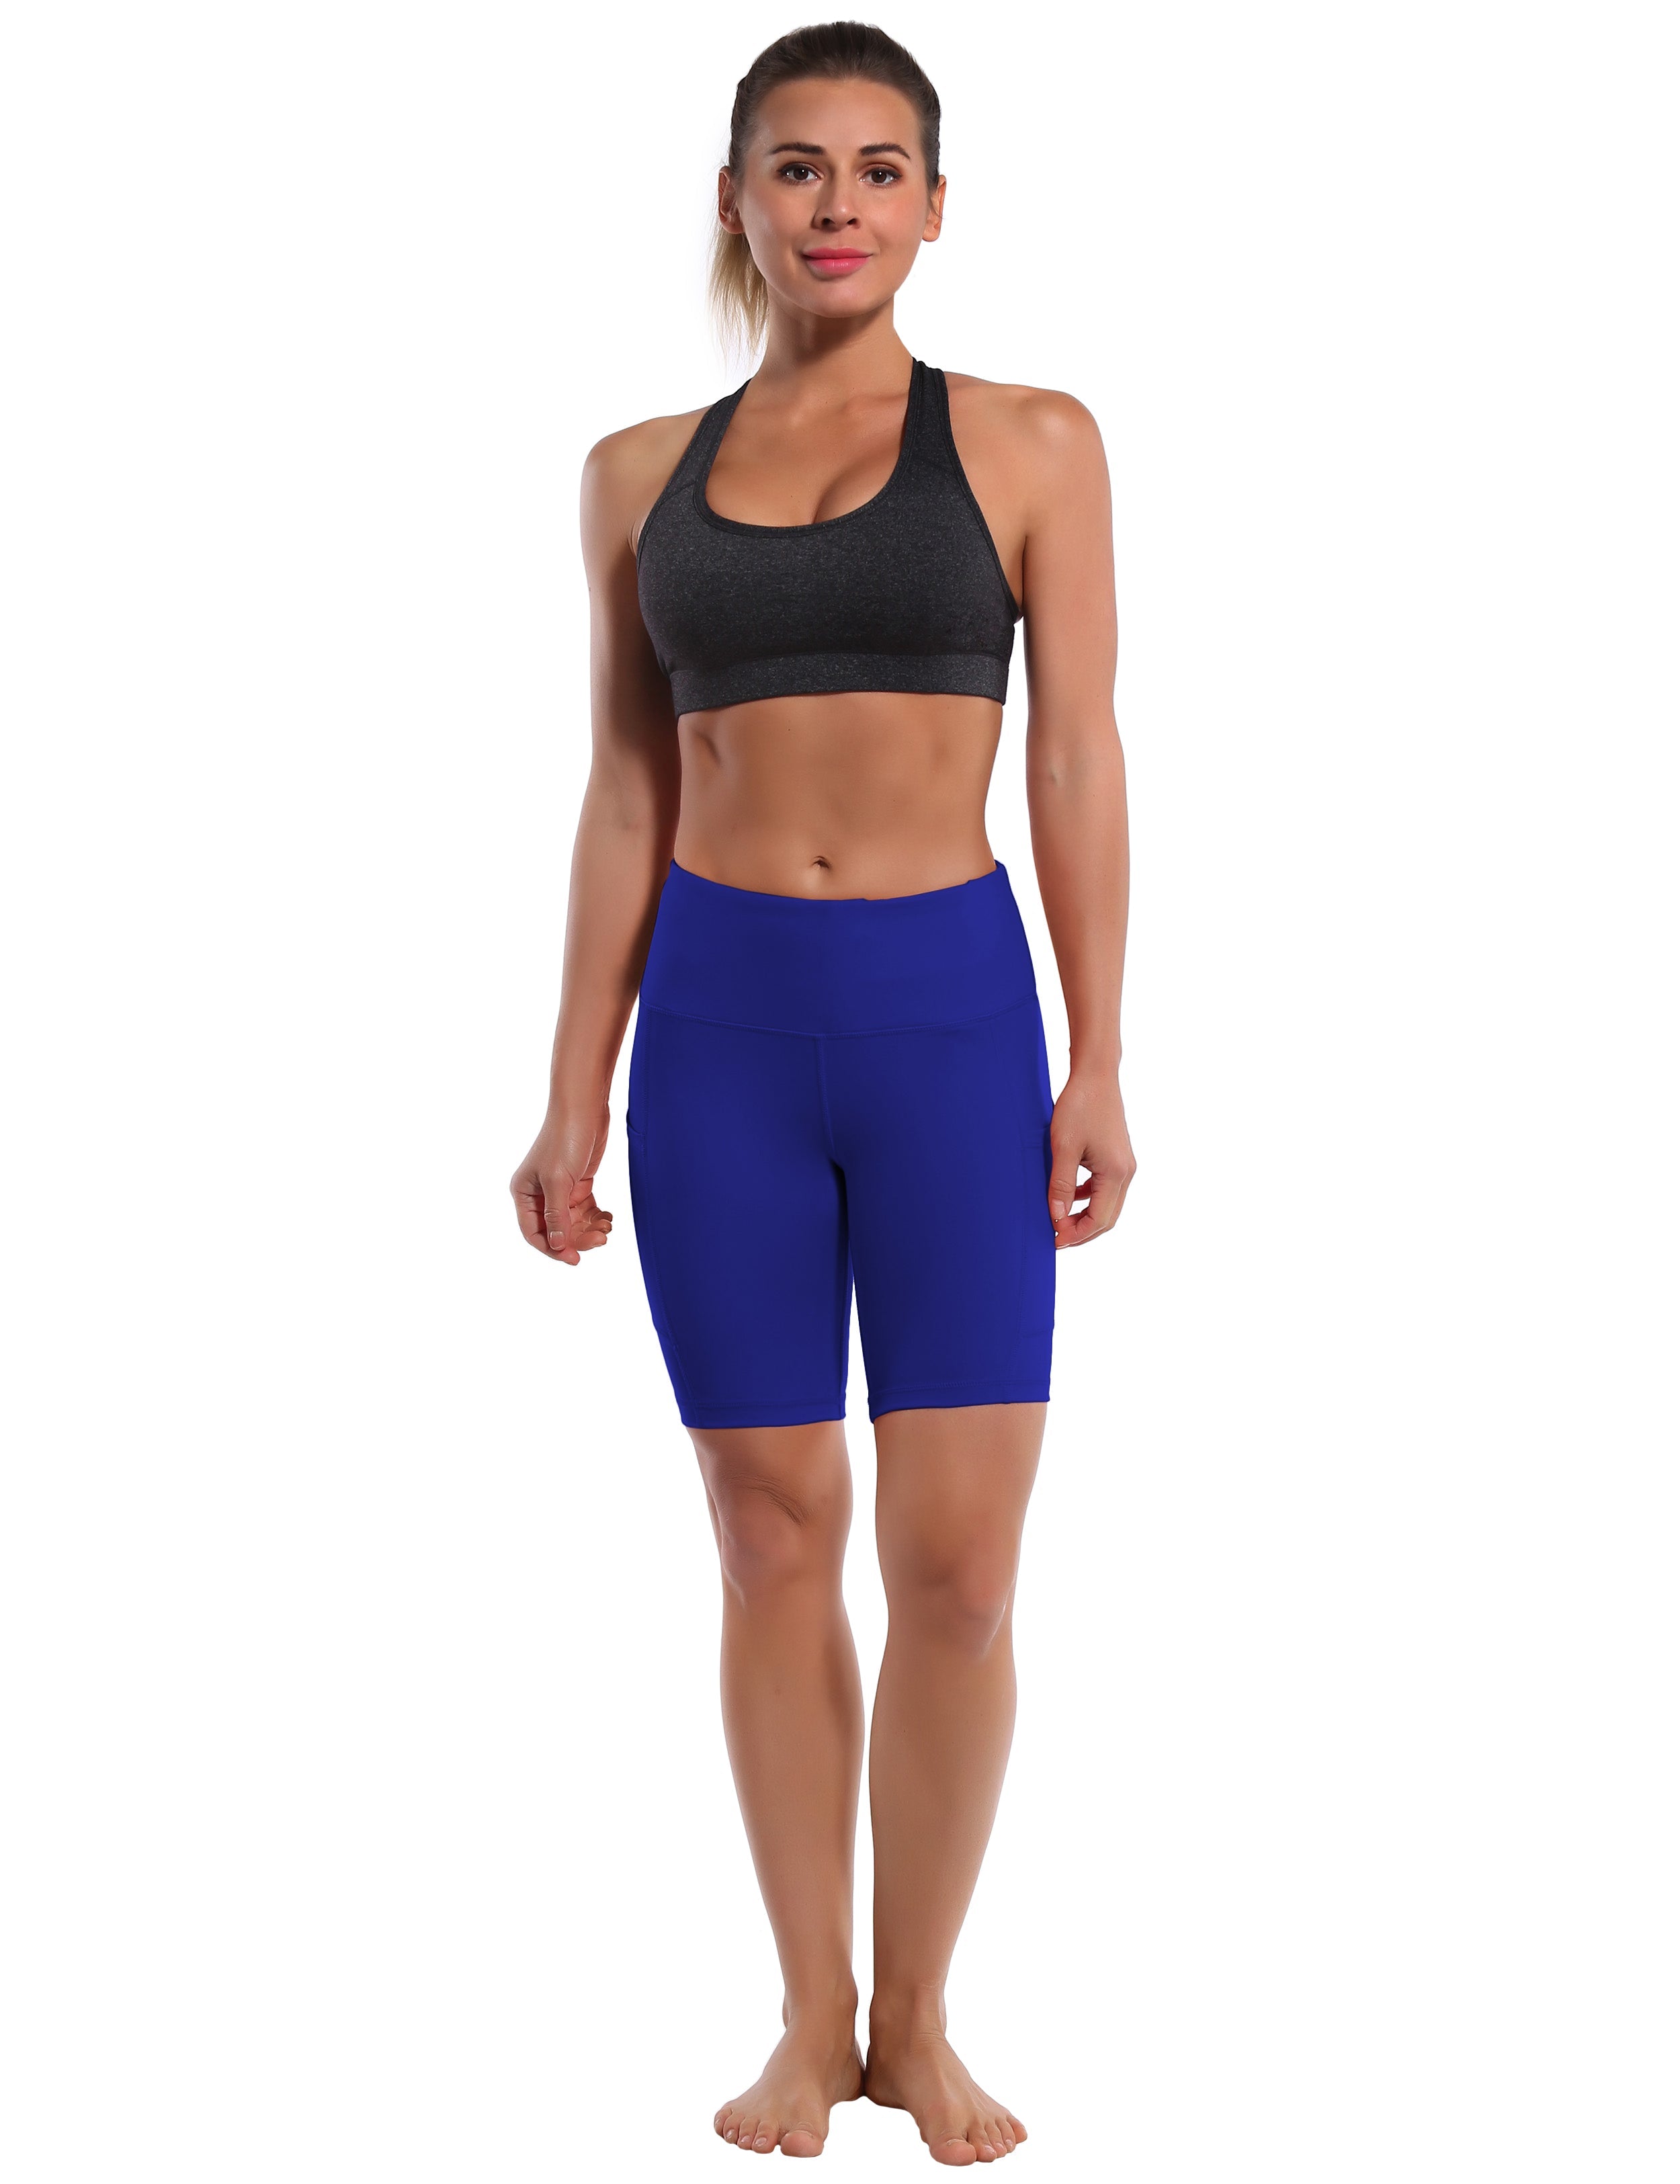 8" Side Pockets yogastudio Shorts navy Sleek, soft, smooth and totally comfortable: our newest style is here. Softest-ever fabric High elasticity High density 4-way stretch Fabric doesn't attract lint easily No see-through Moisture-wicking Machine wash 75% Nylon, 25% Spandex